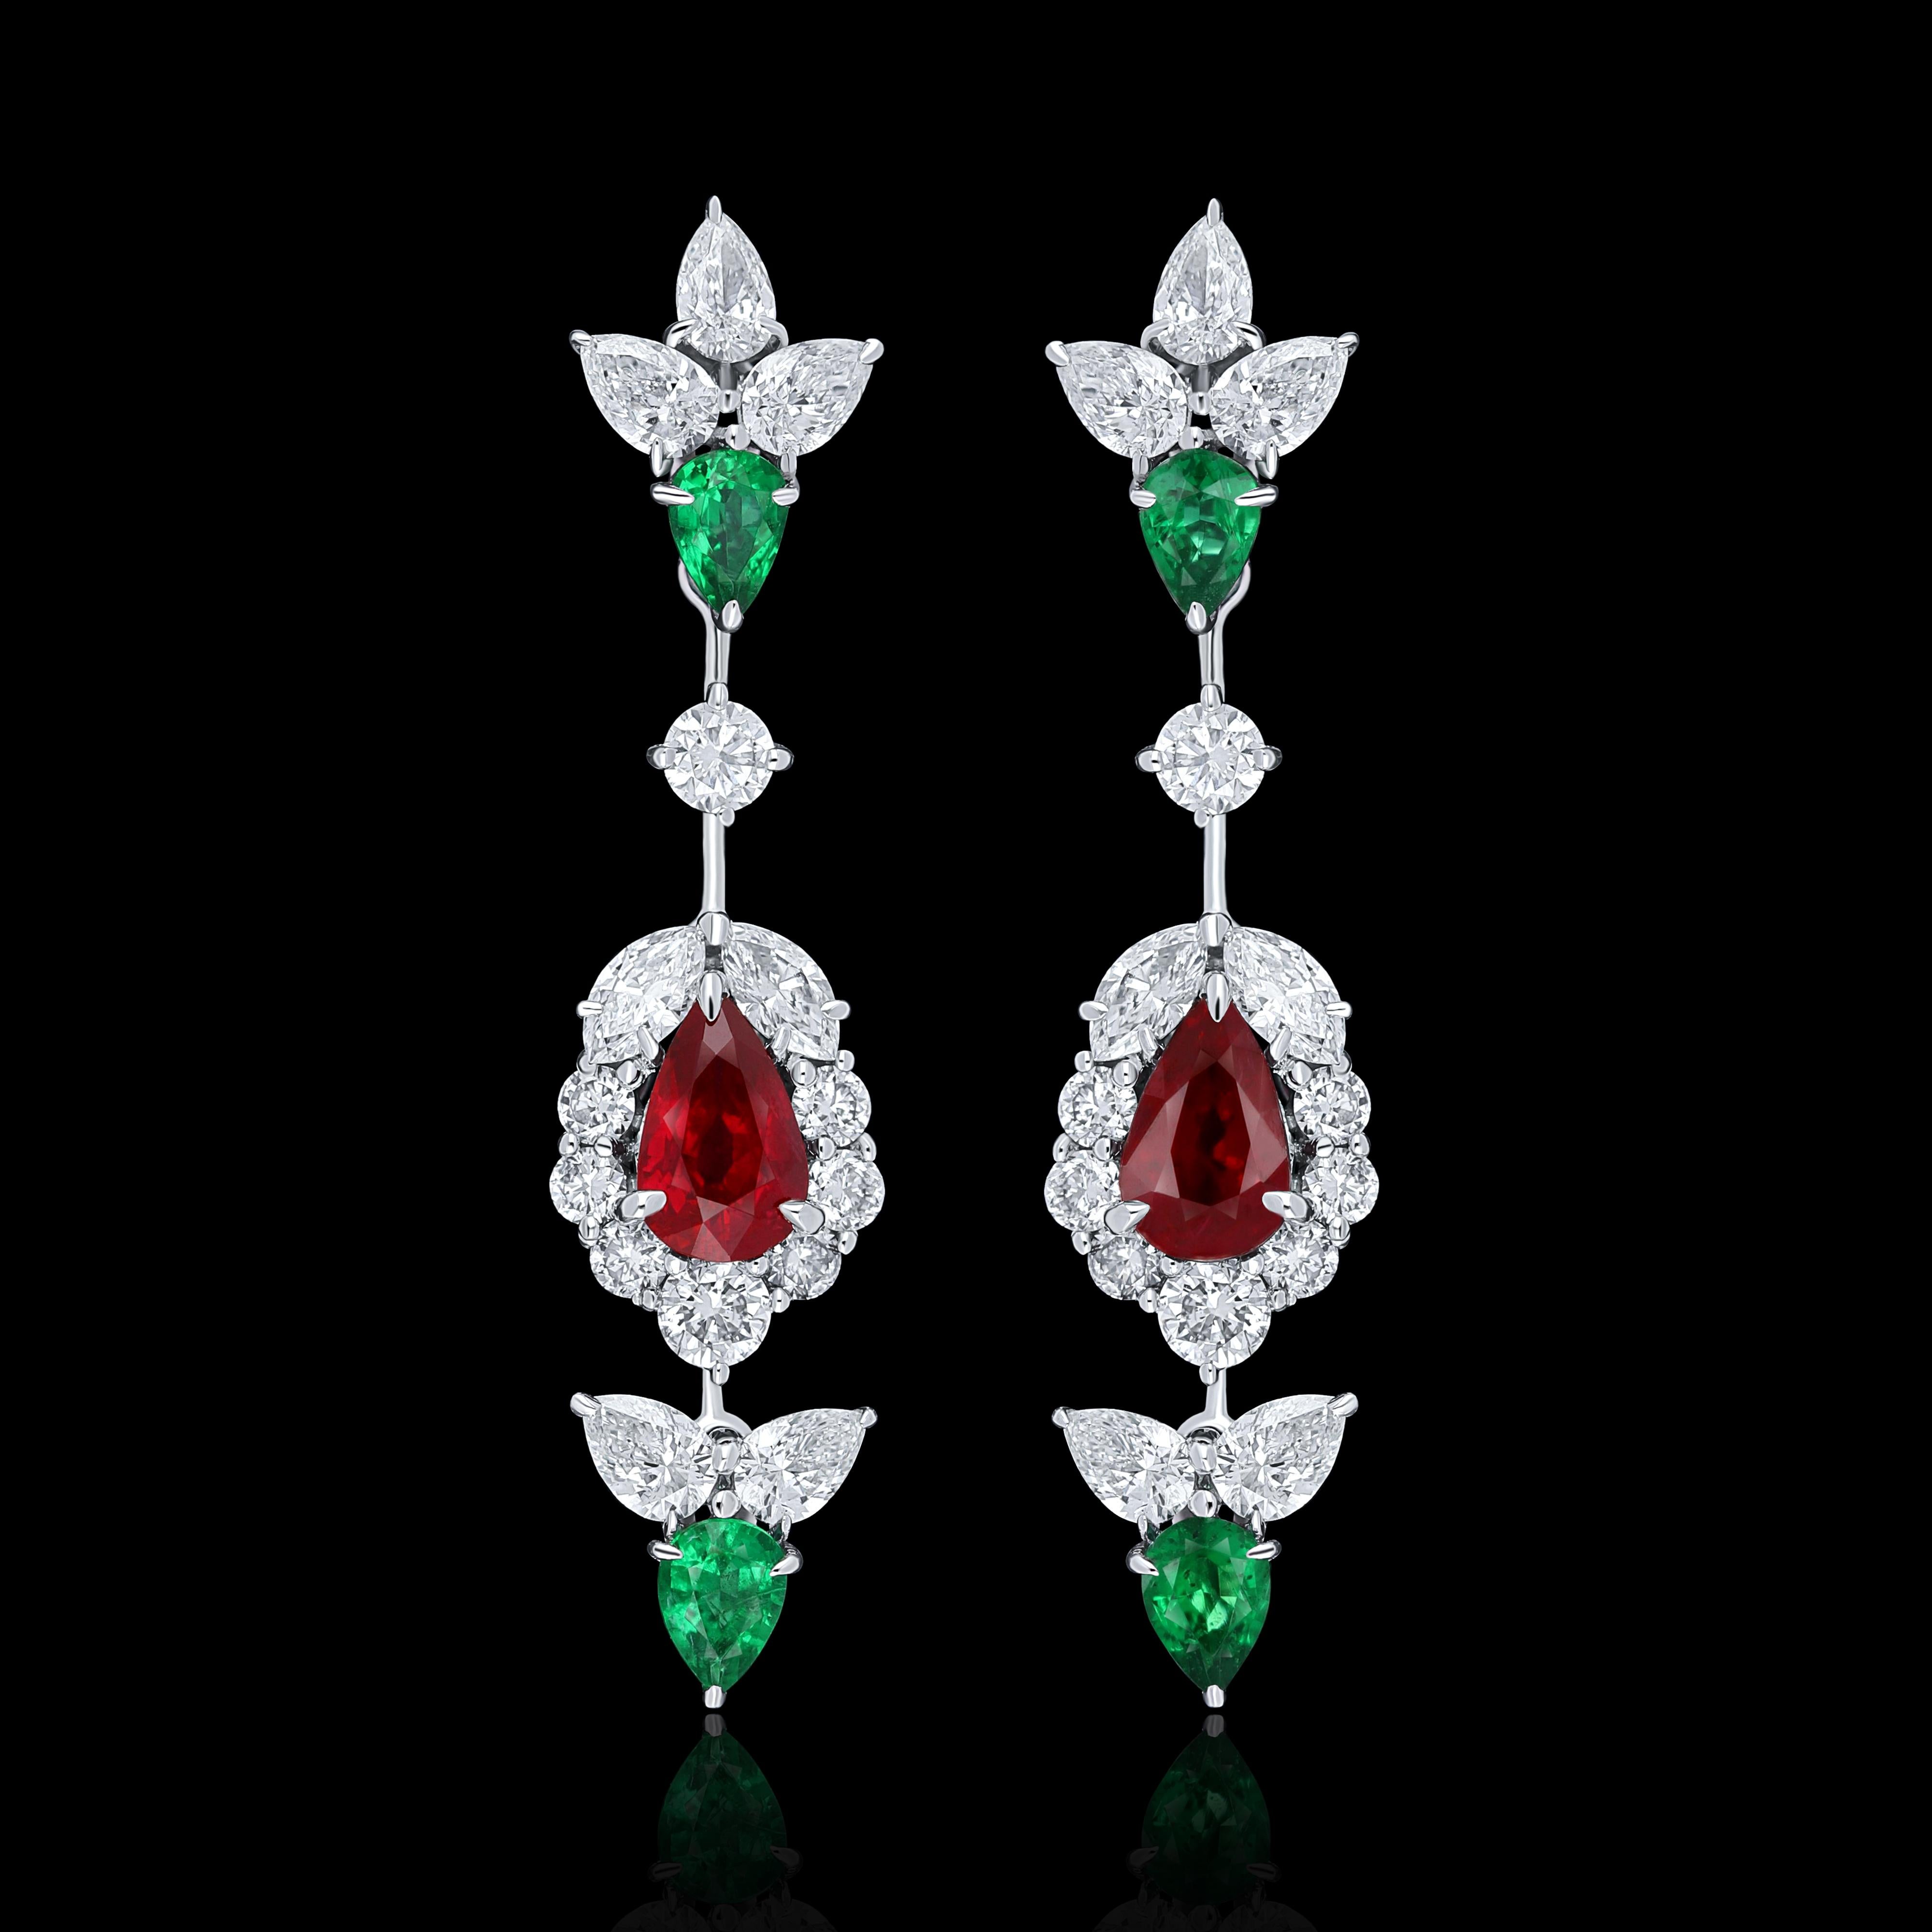 Elegant and exquisitely detailed 18 Karat White Gold Earring, center set with 0.91Cts .Pear Shape intense Red Mozambique Ruby , and 0.45 Cts Vibrant Green Emerald accented with micro pave set Diamonds, weighing approx. 1.57Cts Beautifully Hand